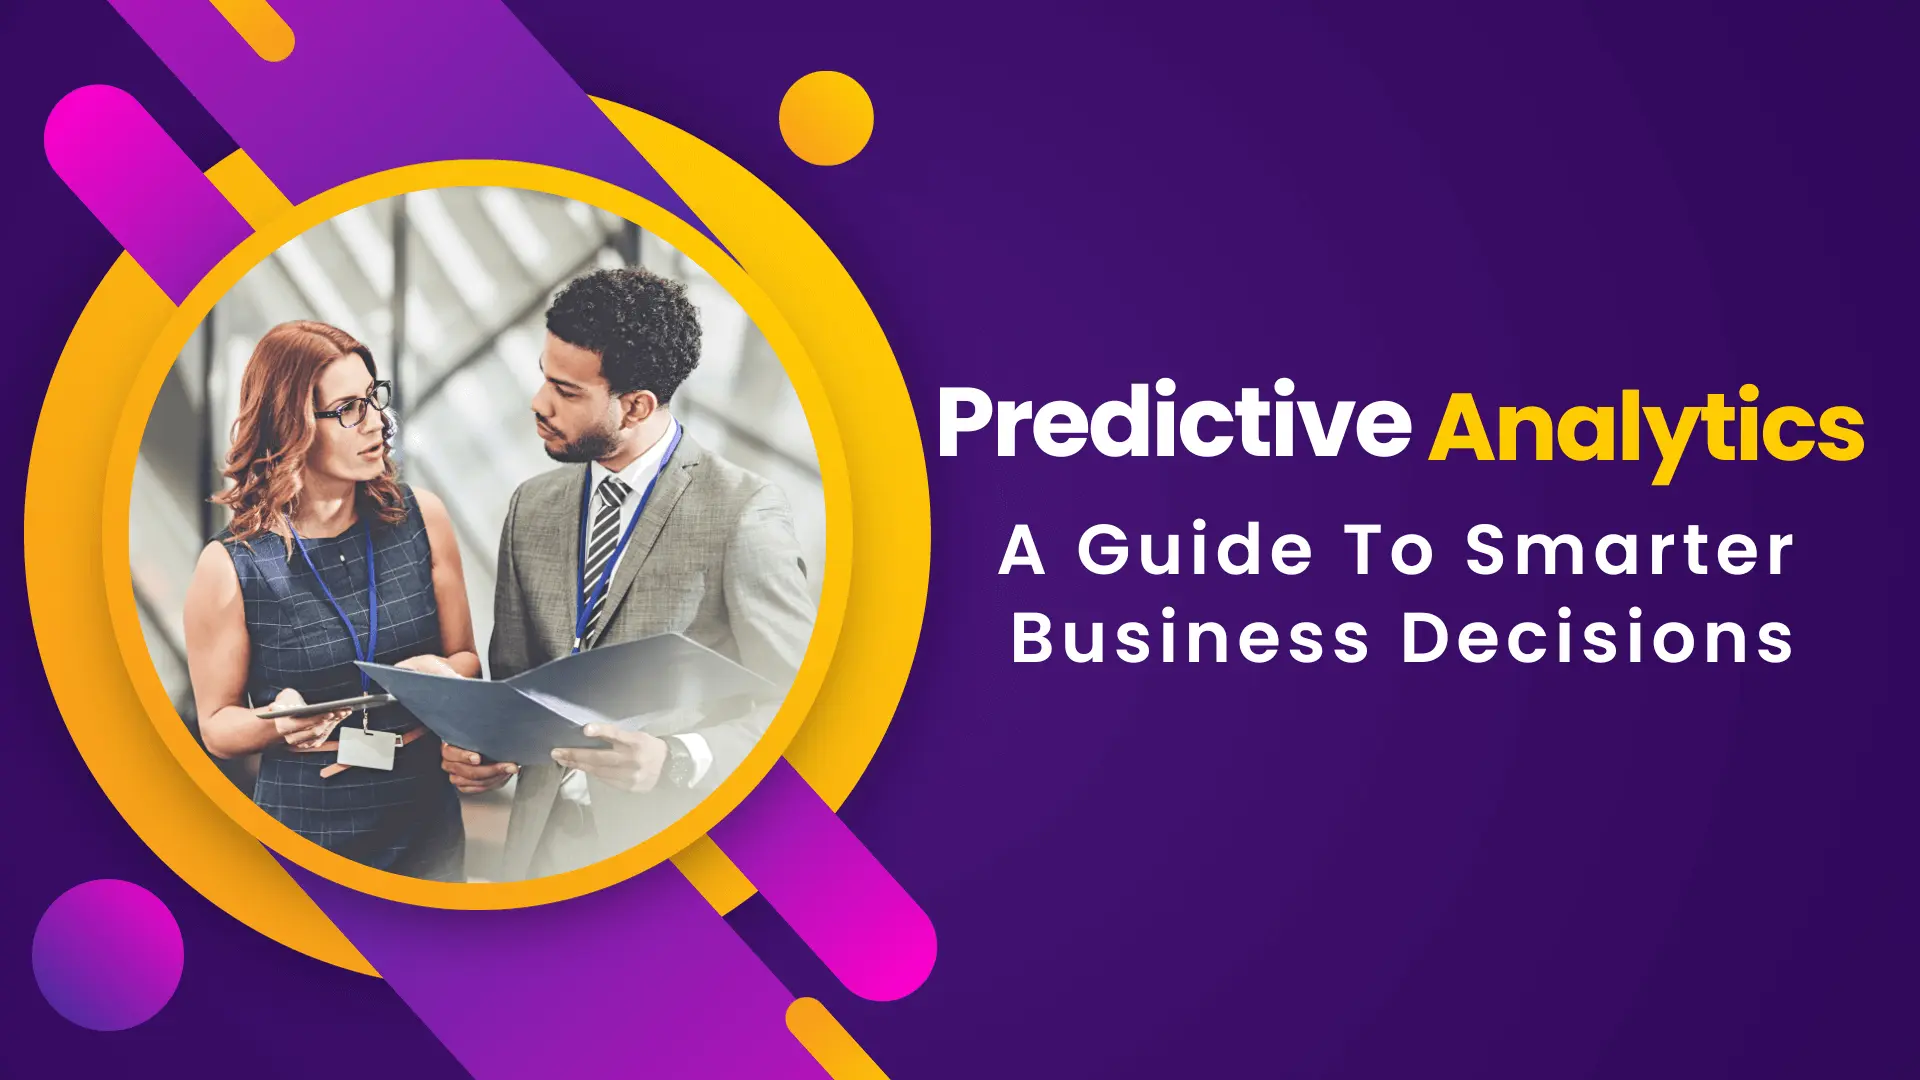 Predictive Analytics A Guide To Smarter Business Decisions